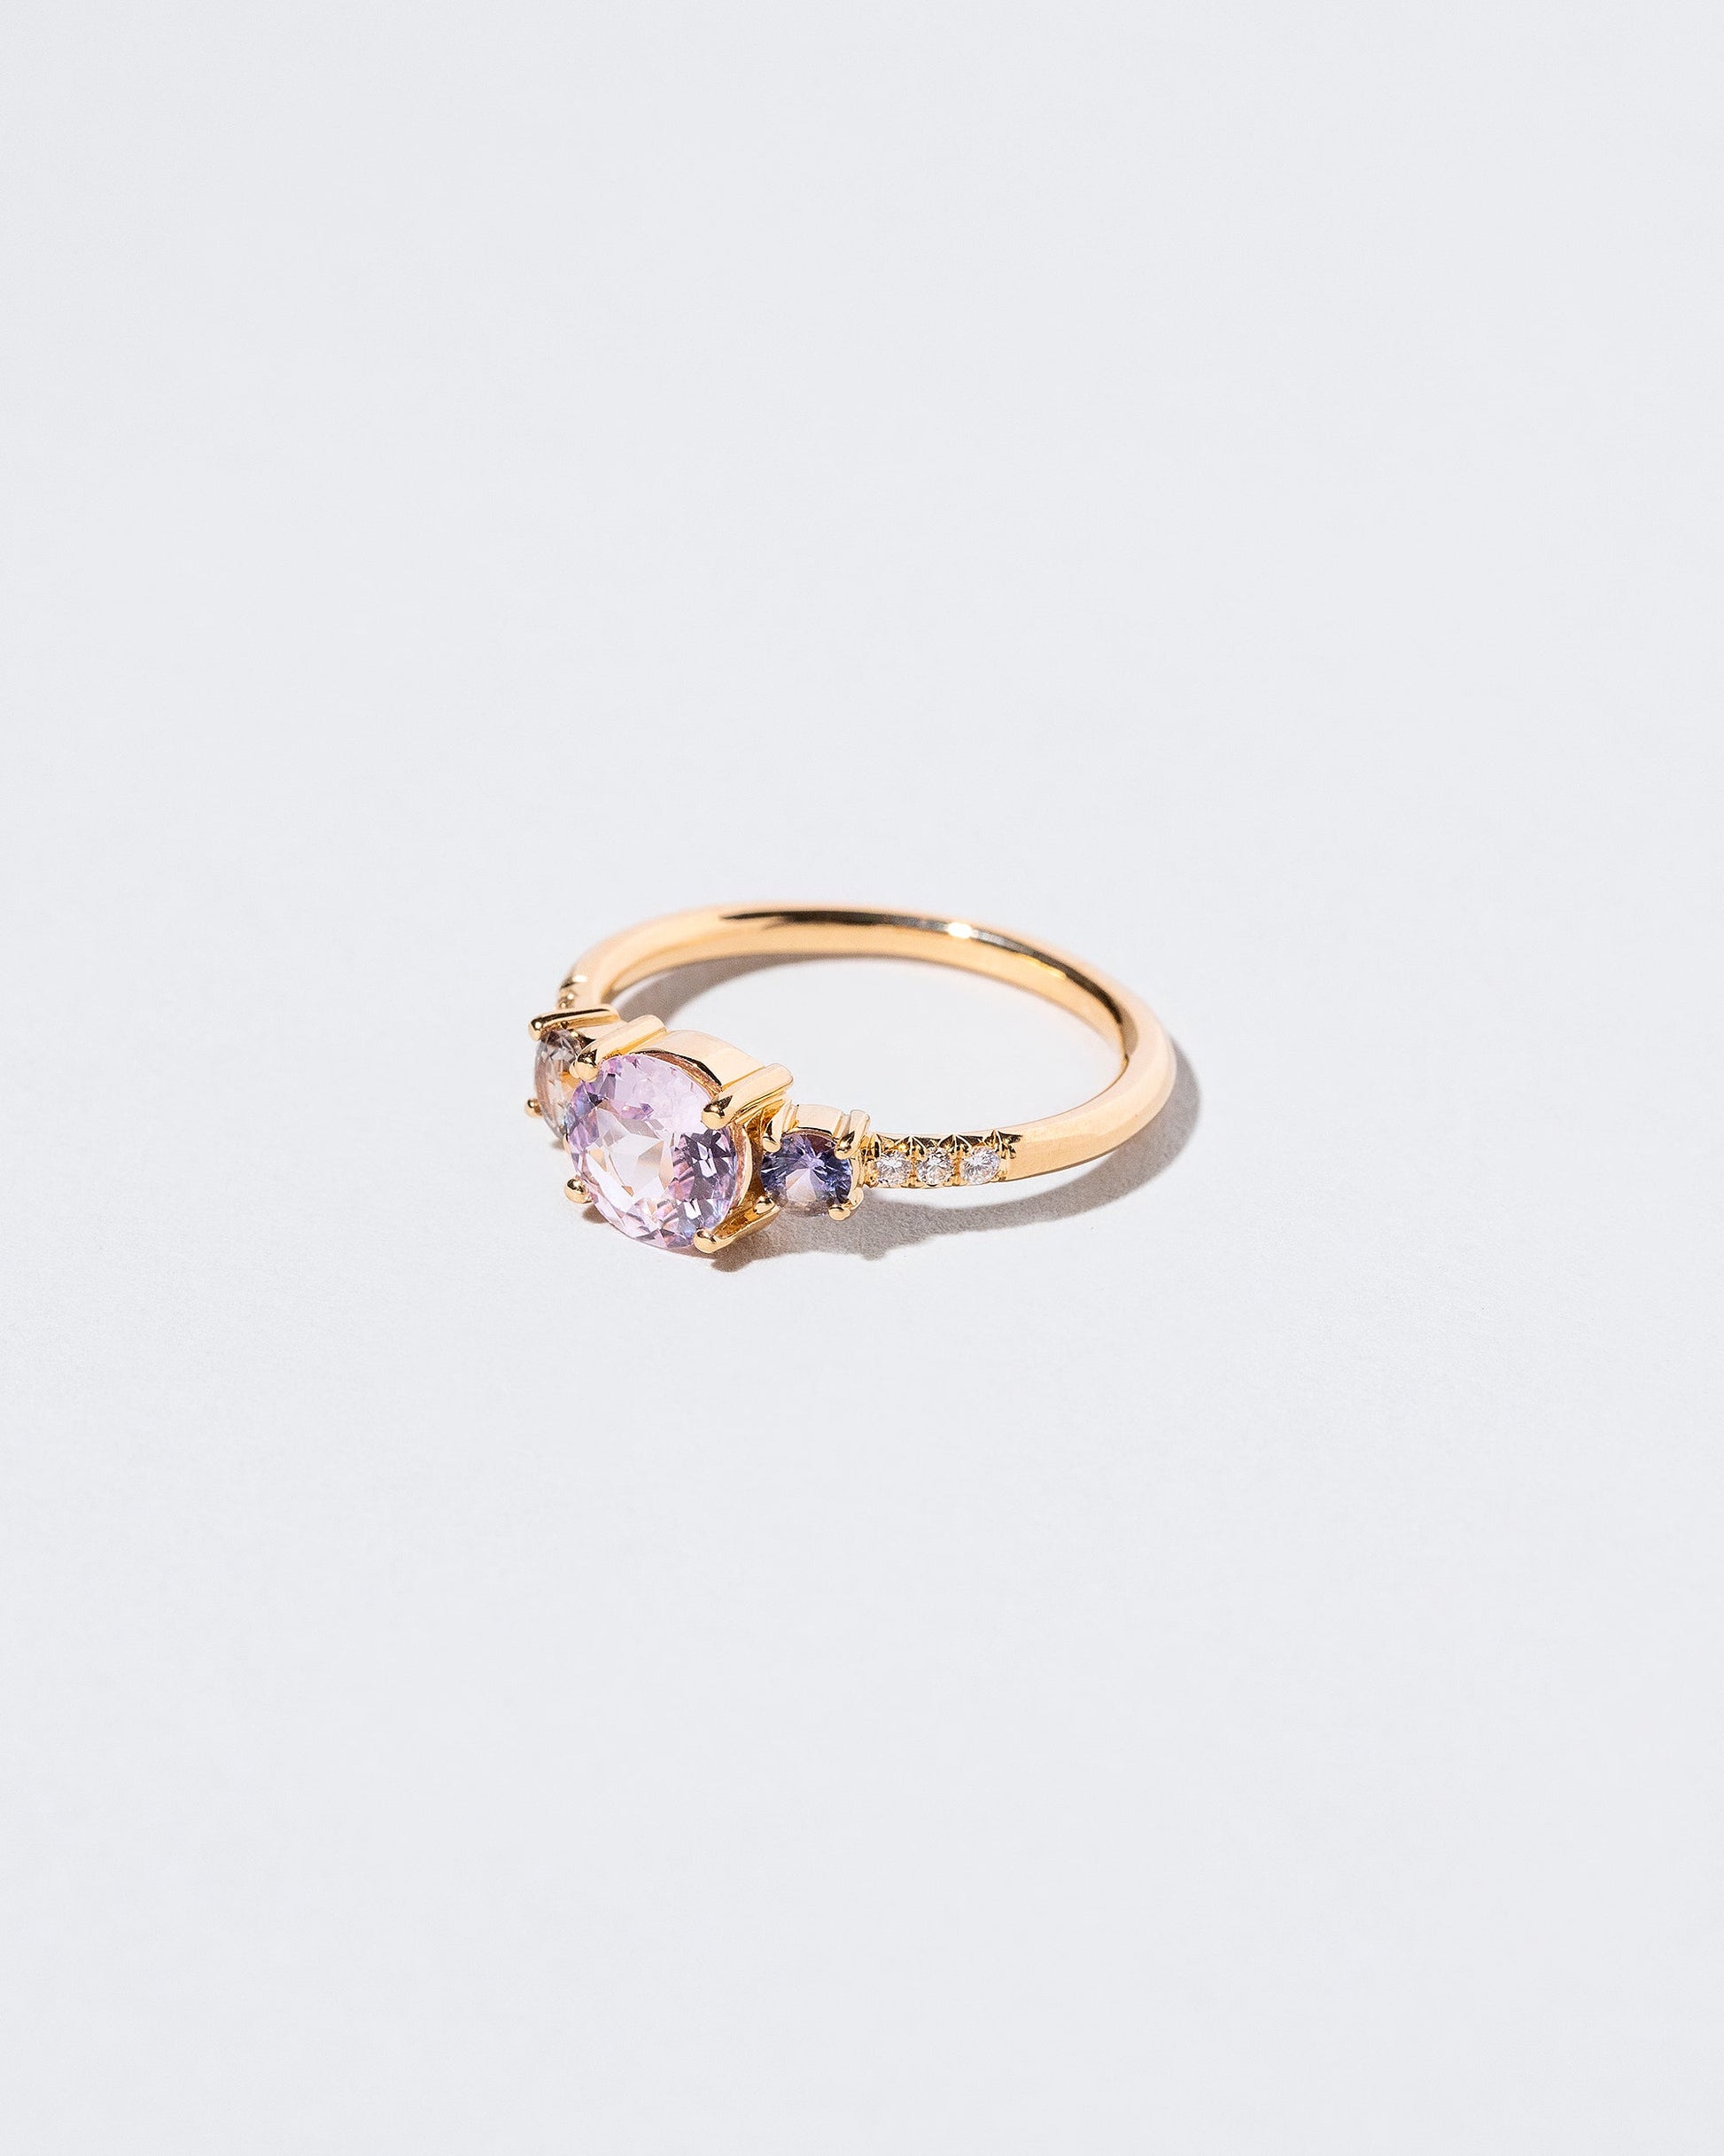  Orion Ring - Pink Sapphire on light color background.